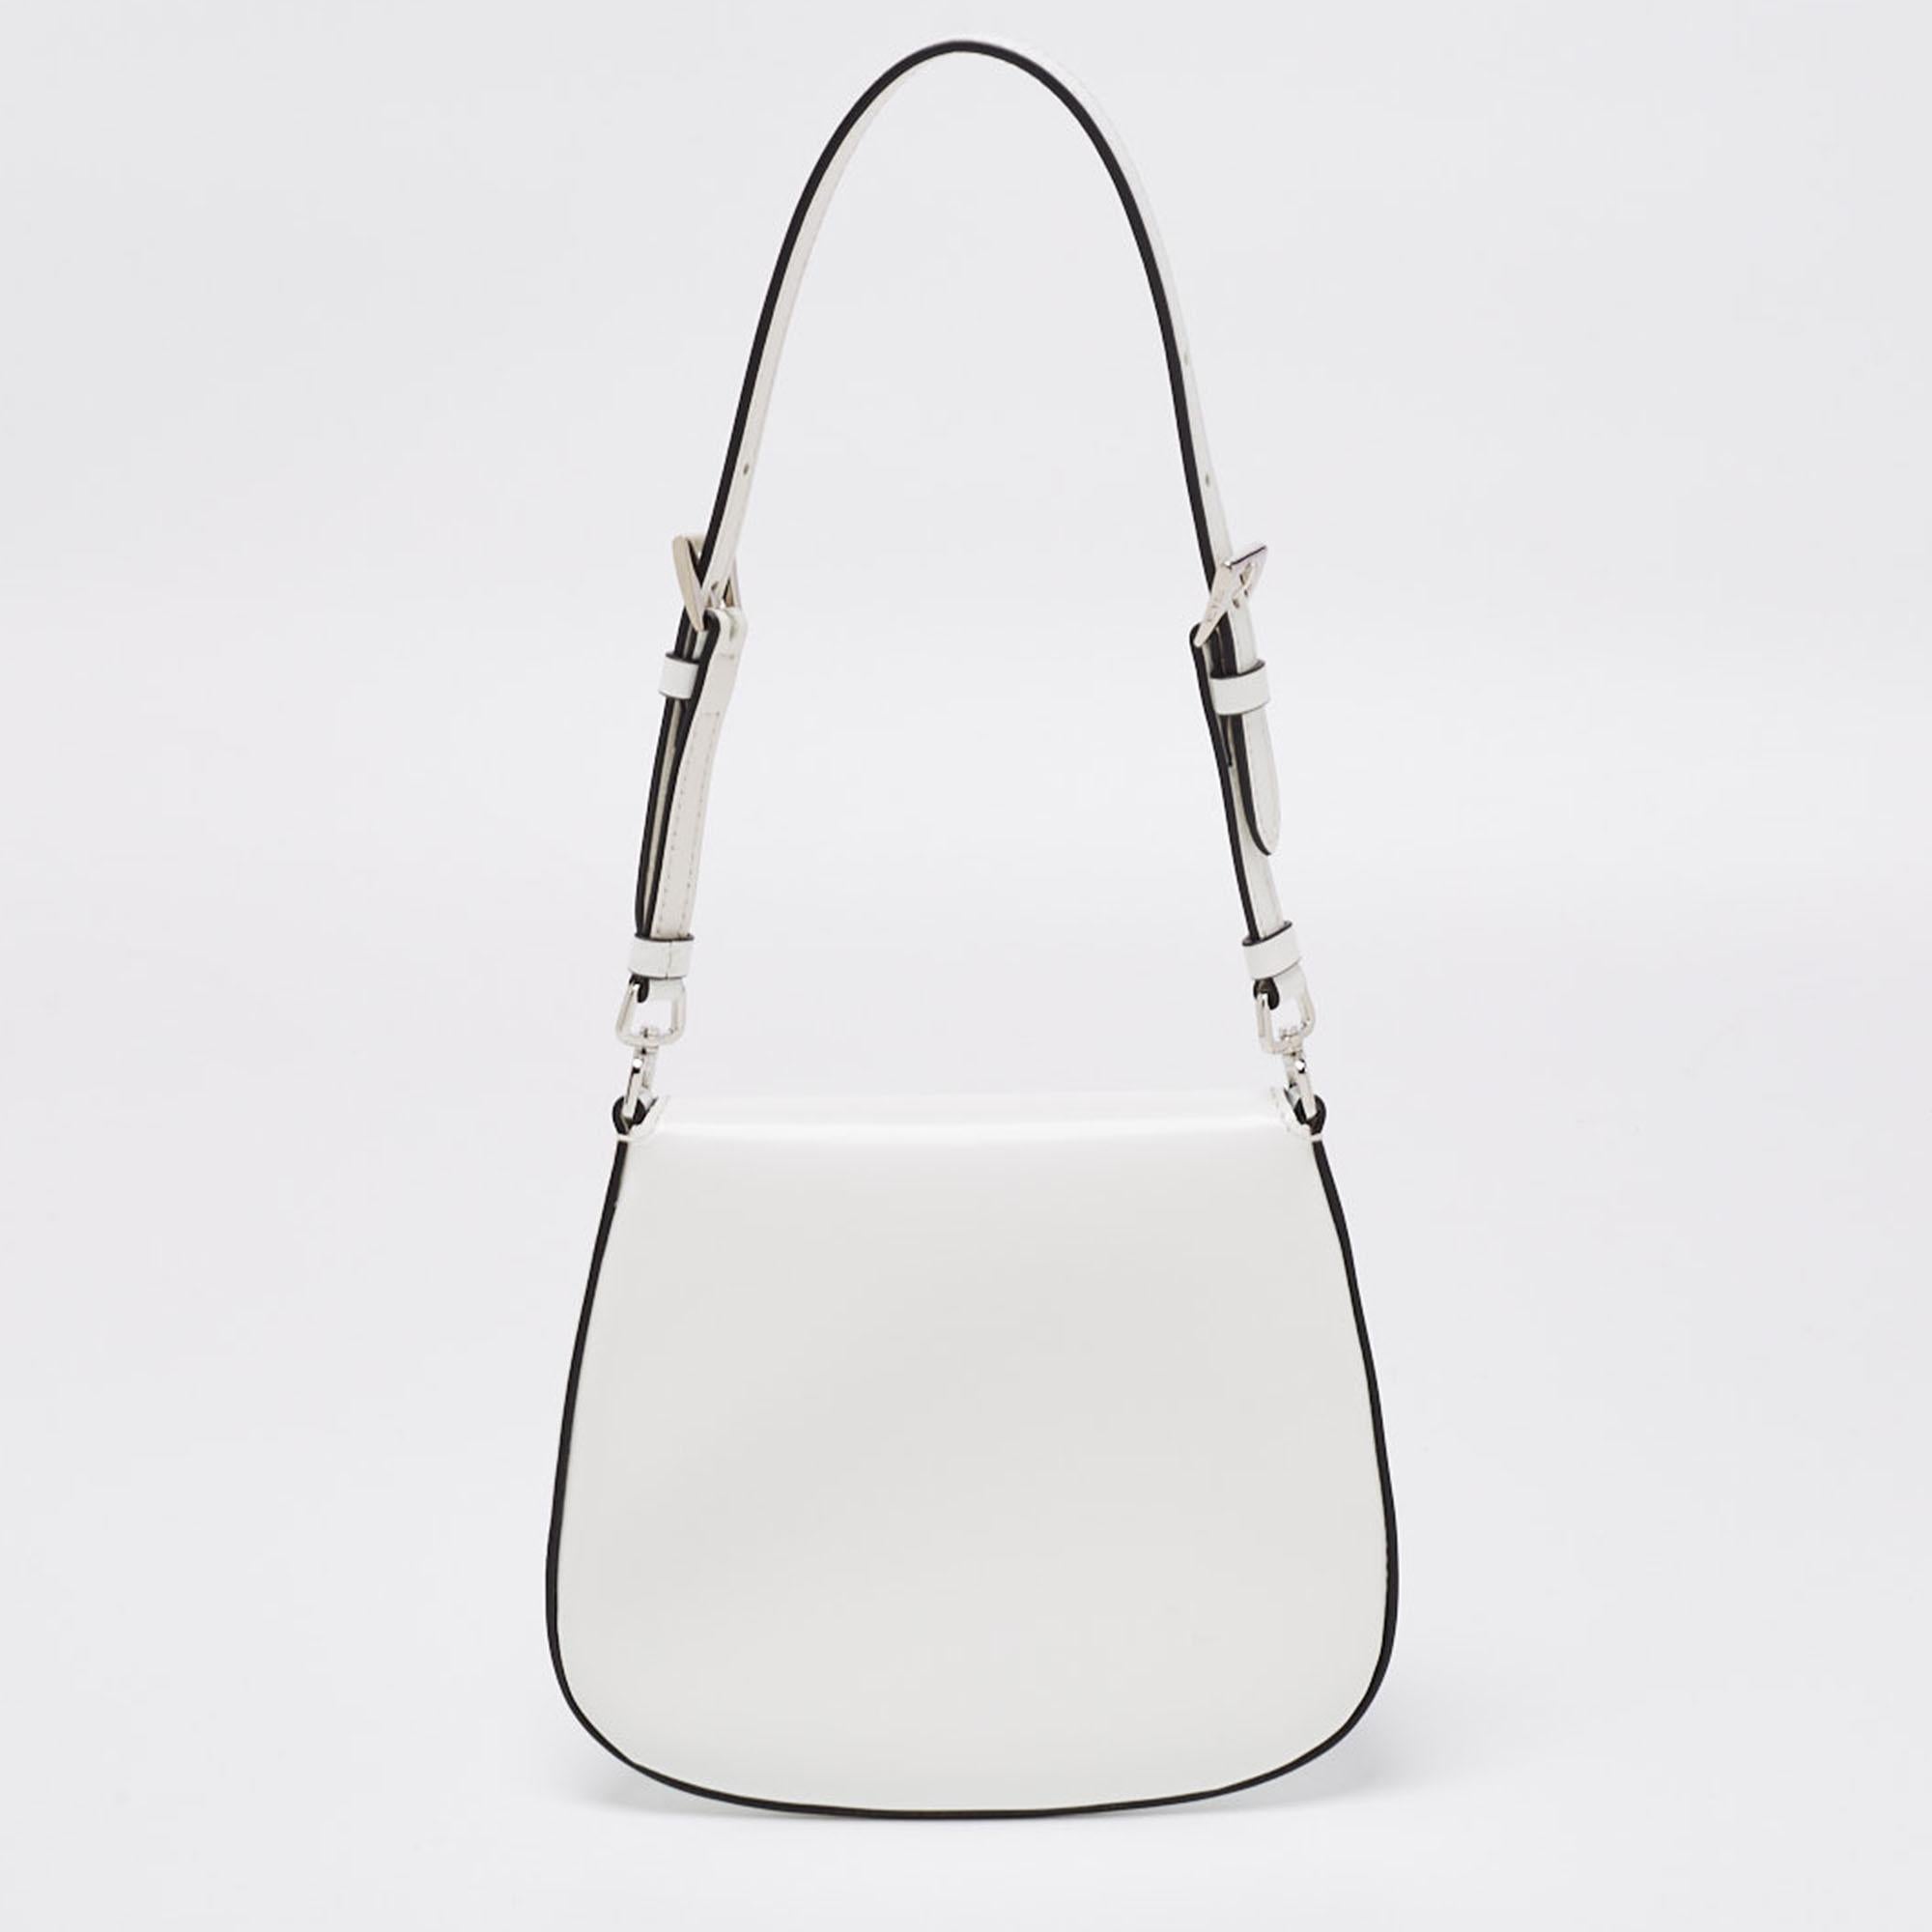 We've found the perfect mini bag for the season. It is this Prada mini Cleo pochette in off-white leather. It has a branded flap and a nylon interior to house your cardholder, keys, lipstick, earphones, and gum.

Includes: Authenticity Card, Info